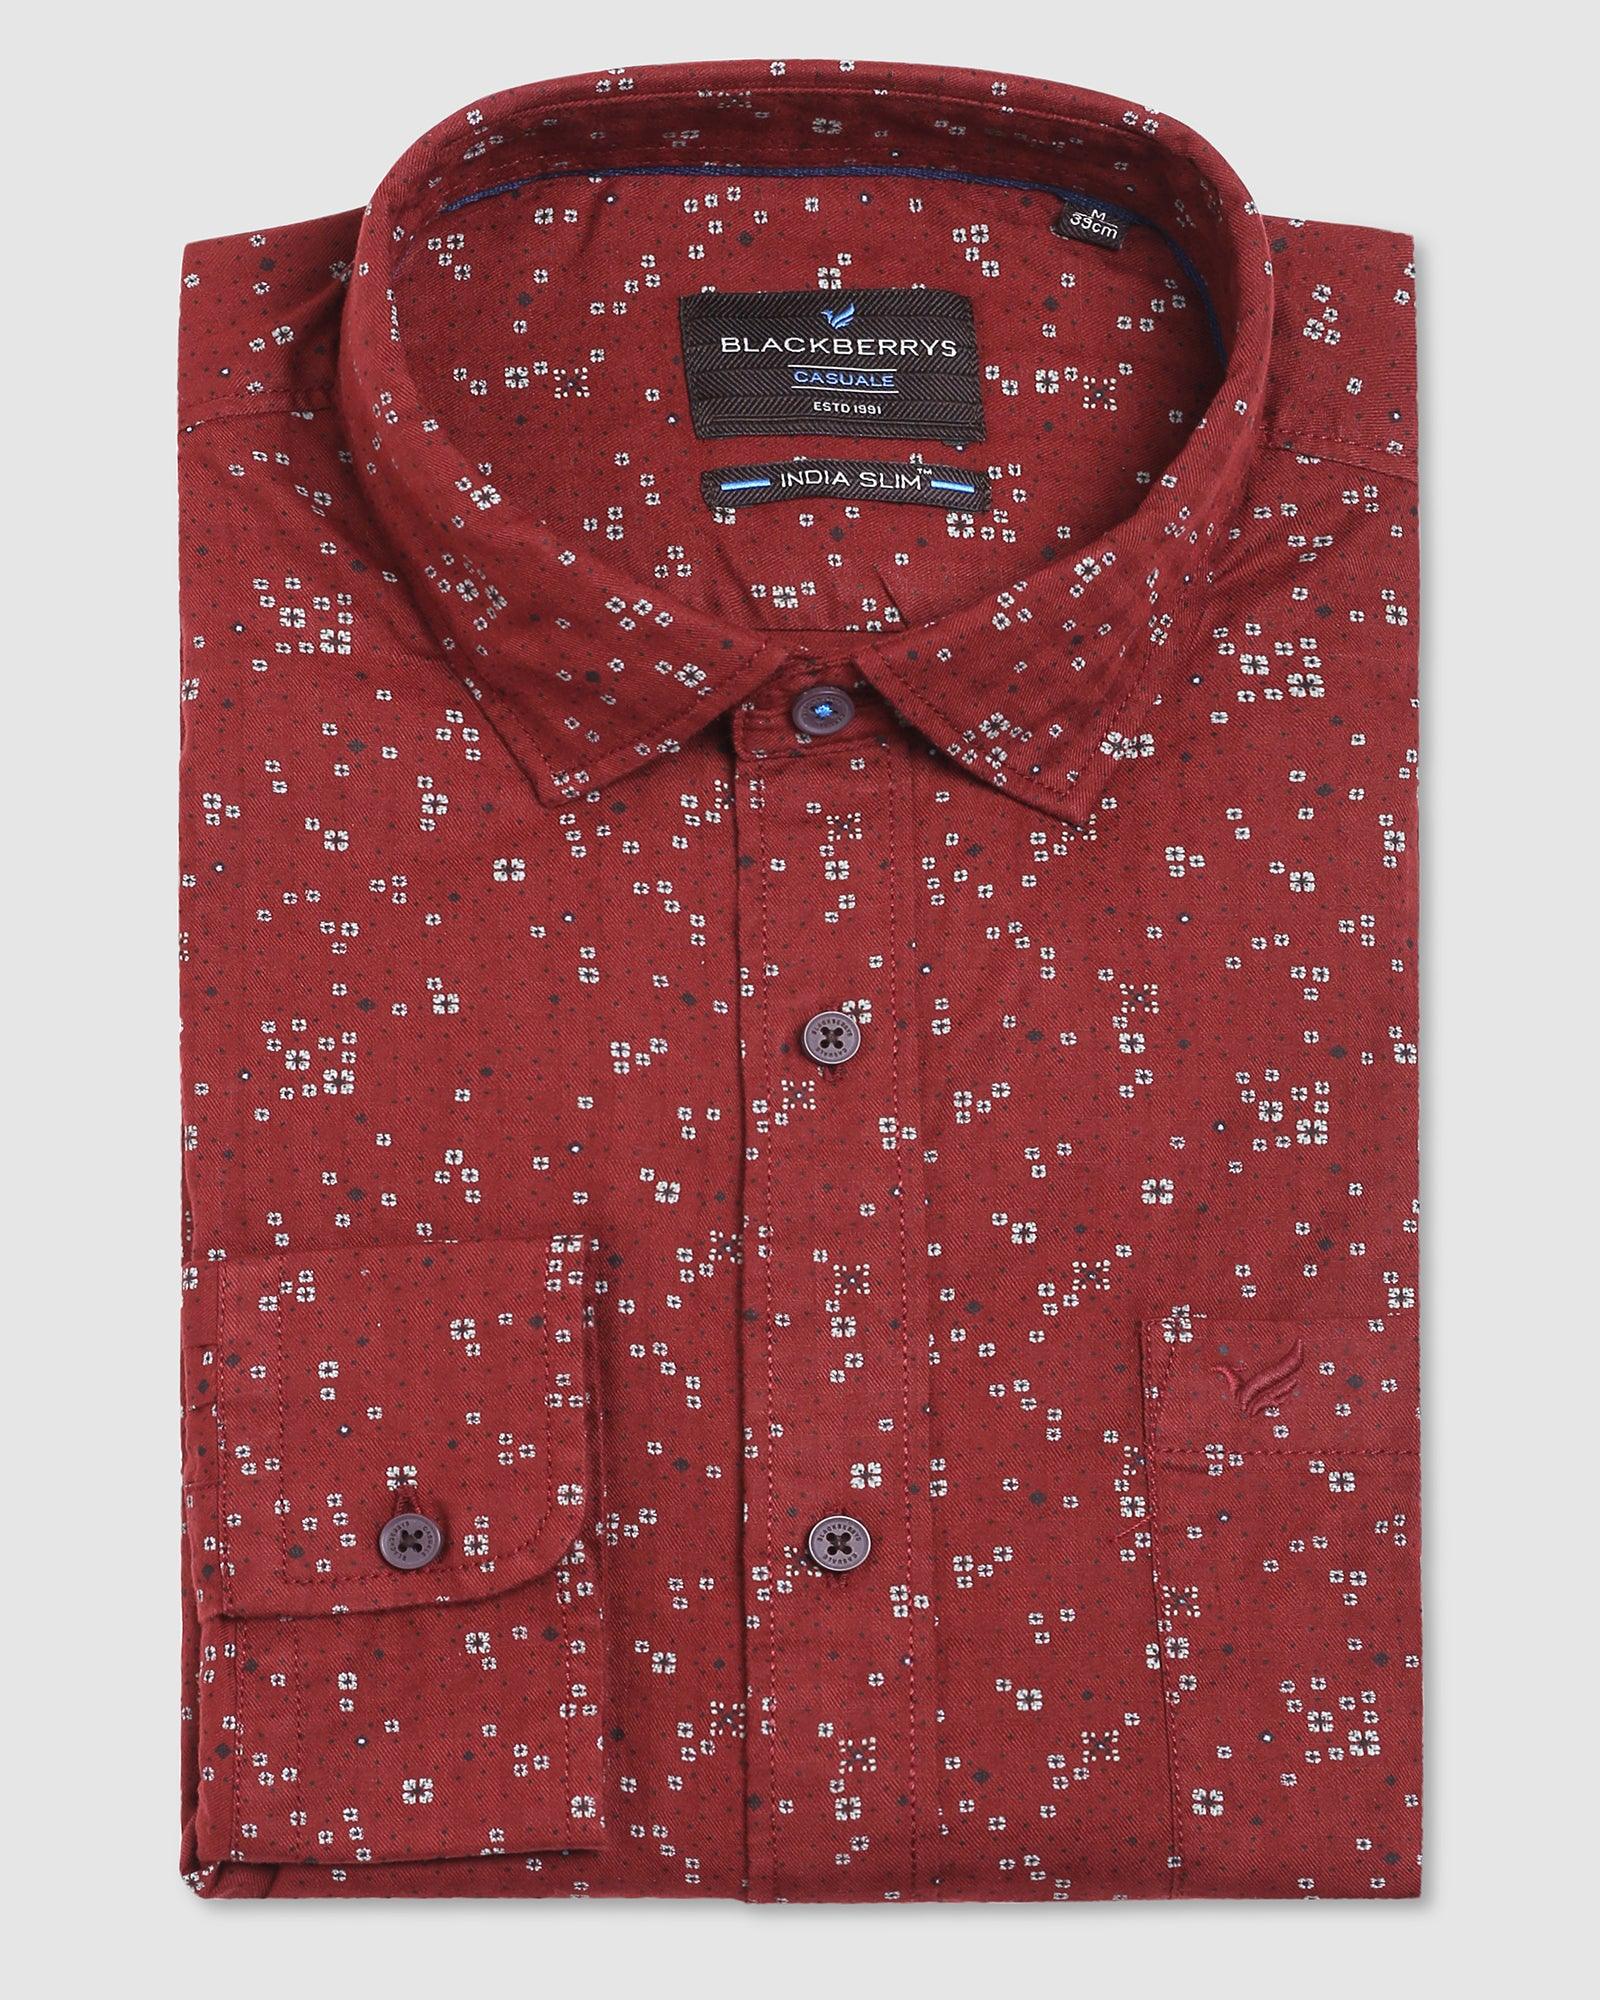 Casual Wine Printed Shirt - Dome